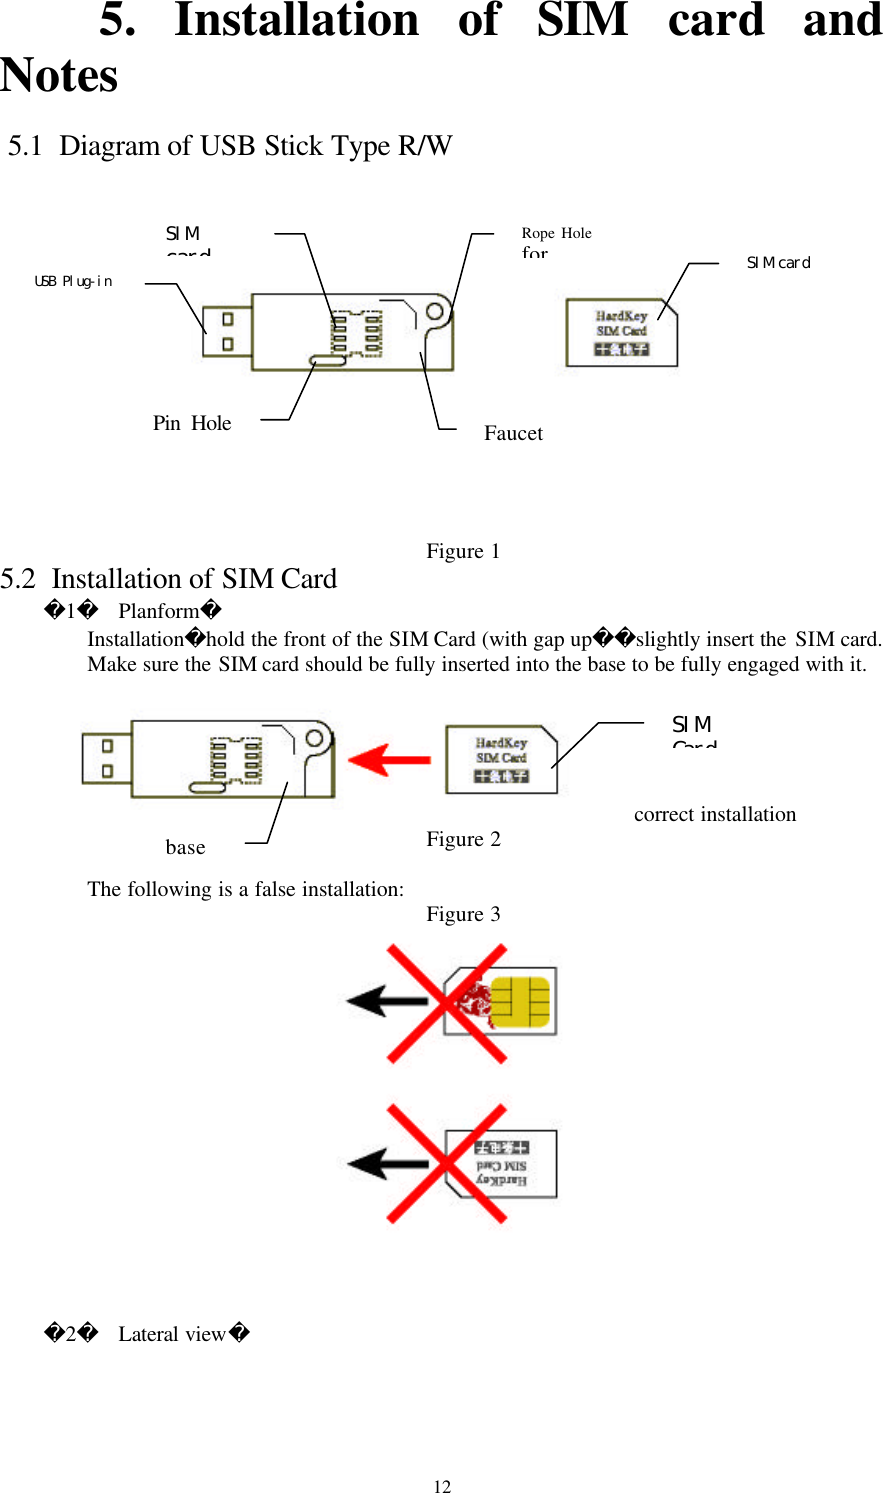 125.  Installation of SIM card andNotes 5.1  Diagram of USB Stick Type R/WFigure 15.2  Installation of SIM Card1 PlanformInstallationhold the front of the SIM Card (with gap upslightly insert the SIM card.Make sure the SIM card should be fully inserted into the base to be fully engaged with it.  correct installationFigure 2The following is a false installation: Figure 32 Lateral viewＳＩＭｃａｒｄRope HoleforFaucetＳＩＭ　ｃａｒｄPin HoleＵＳＢ　Ｐｌｕｇ－ｉｎbaseＳＩＭＣａｒｄ